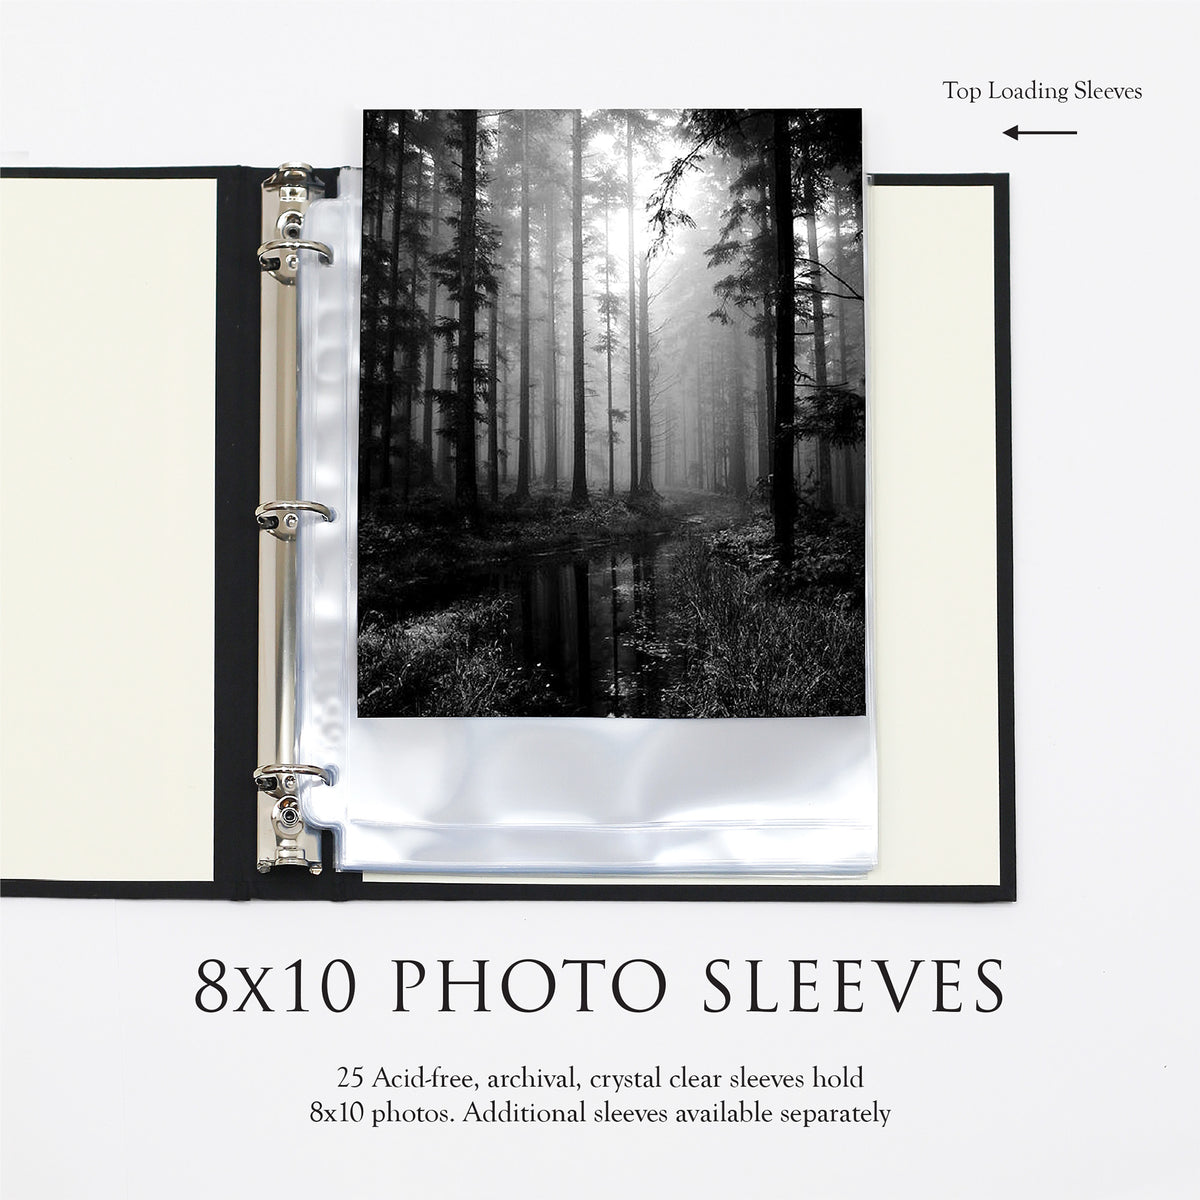 Large Photo Binder For 8x10 Photos | Cover: Amethyst Silk | Available Personalized